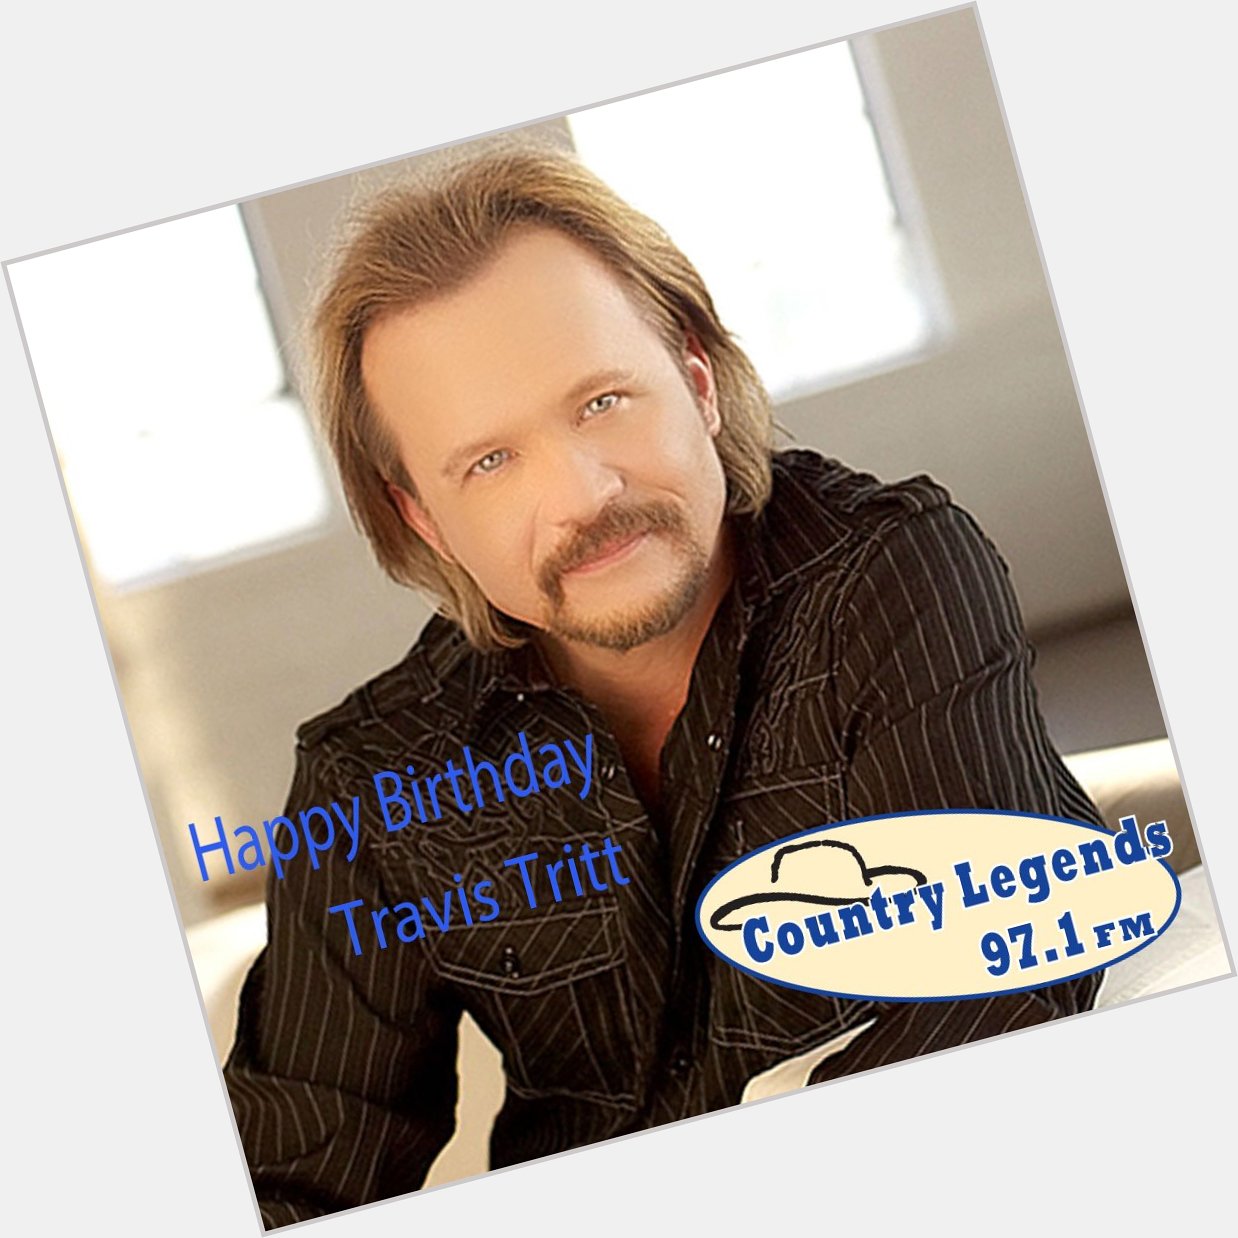 Happy Birthday To Travis Tritt Who Was Born On This Day In 1963! Travis Has Had 7 Hits. 